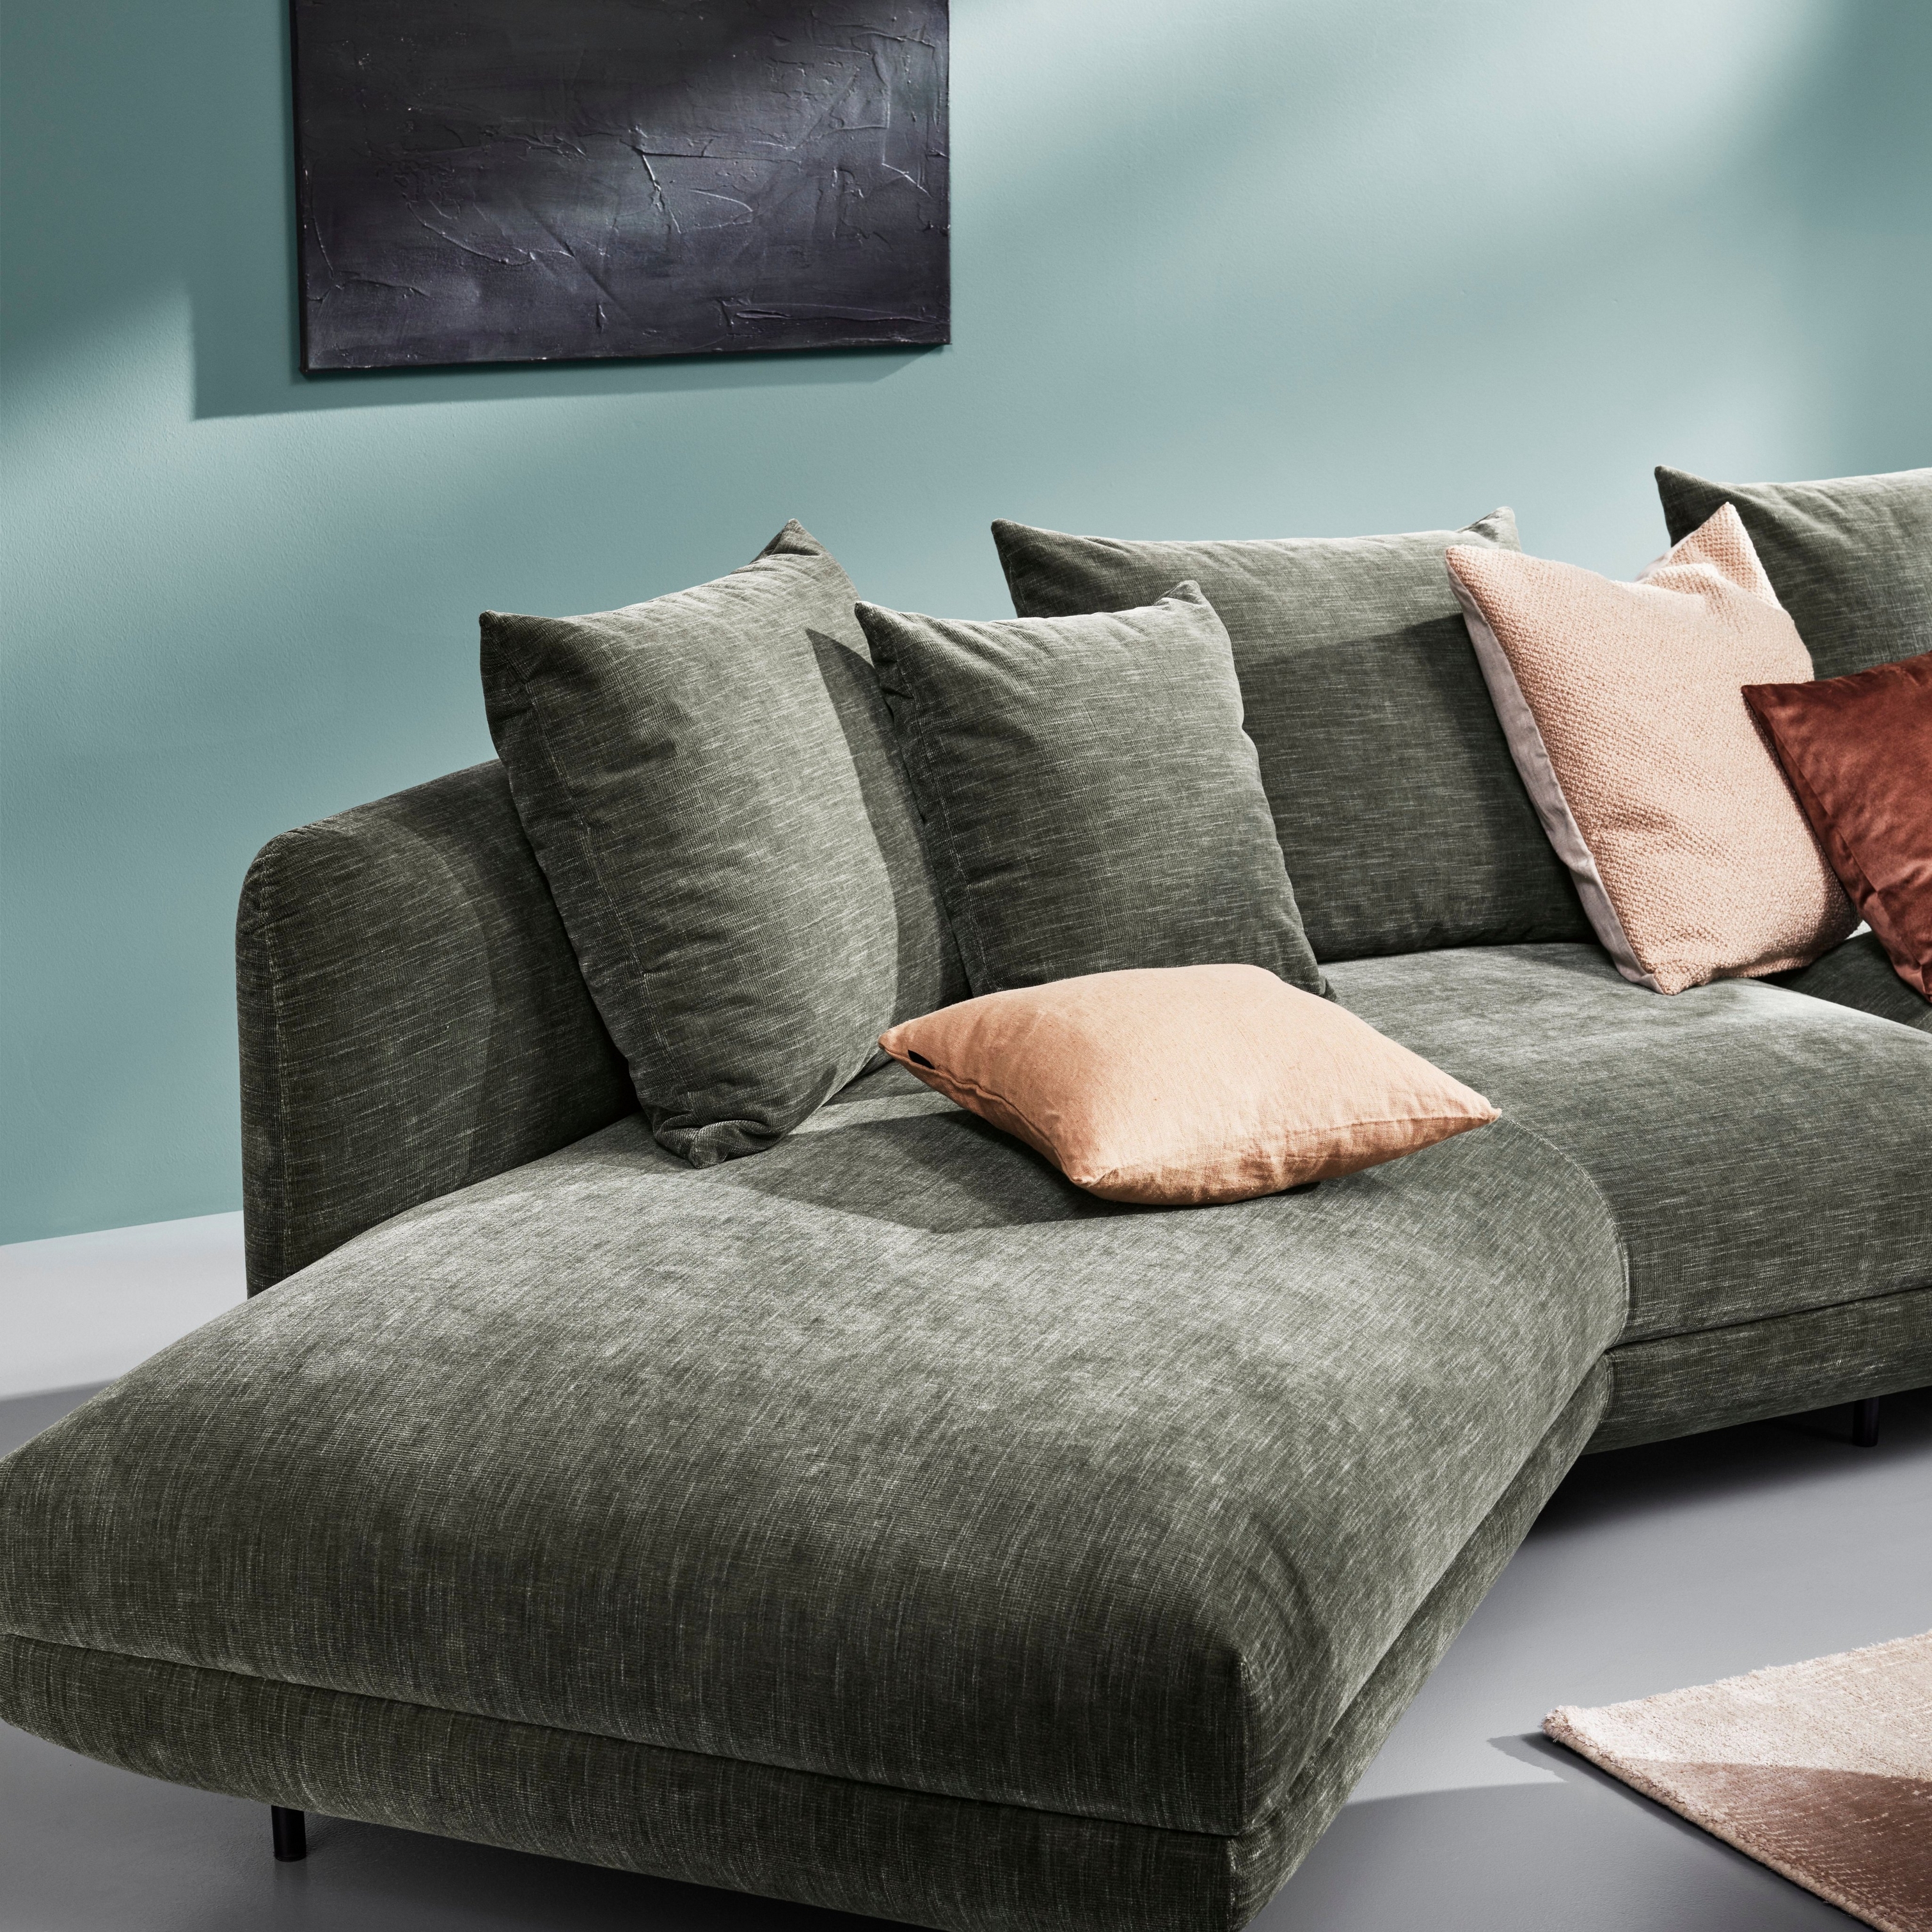 Green sectional Salamanca sofa with pillows against a teal wall with abstract art.